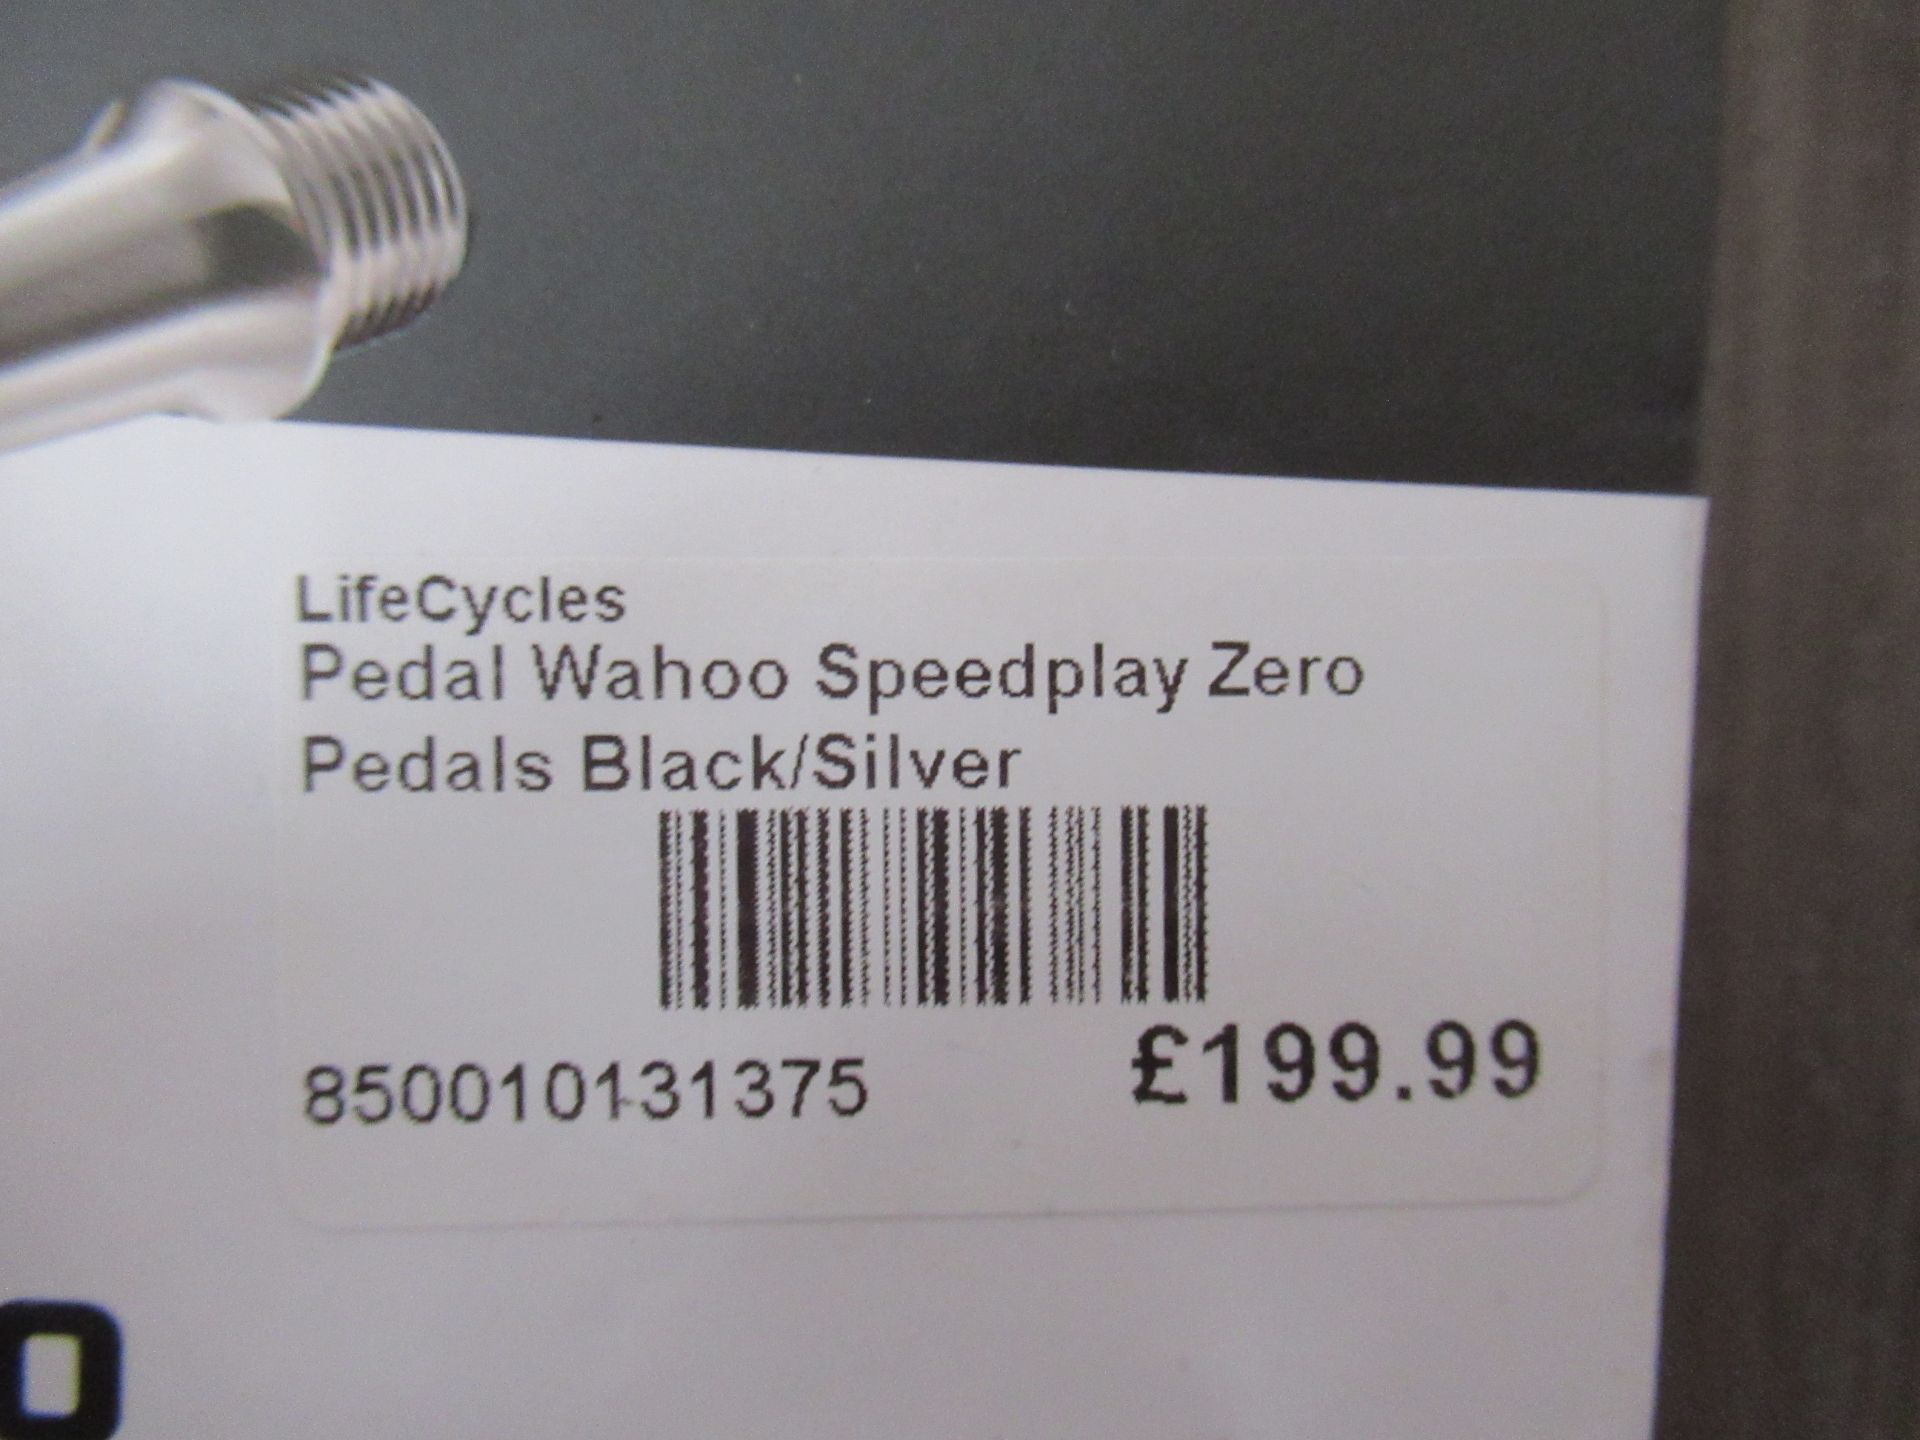 Wahoo Speedplay Zero pedal system (RRP£199.99) - Image 2 of 2